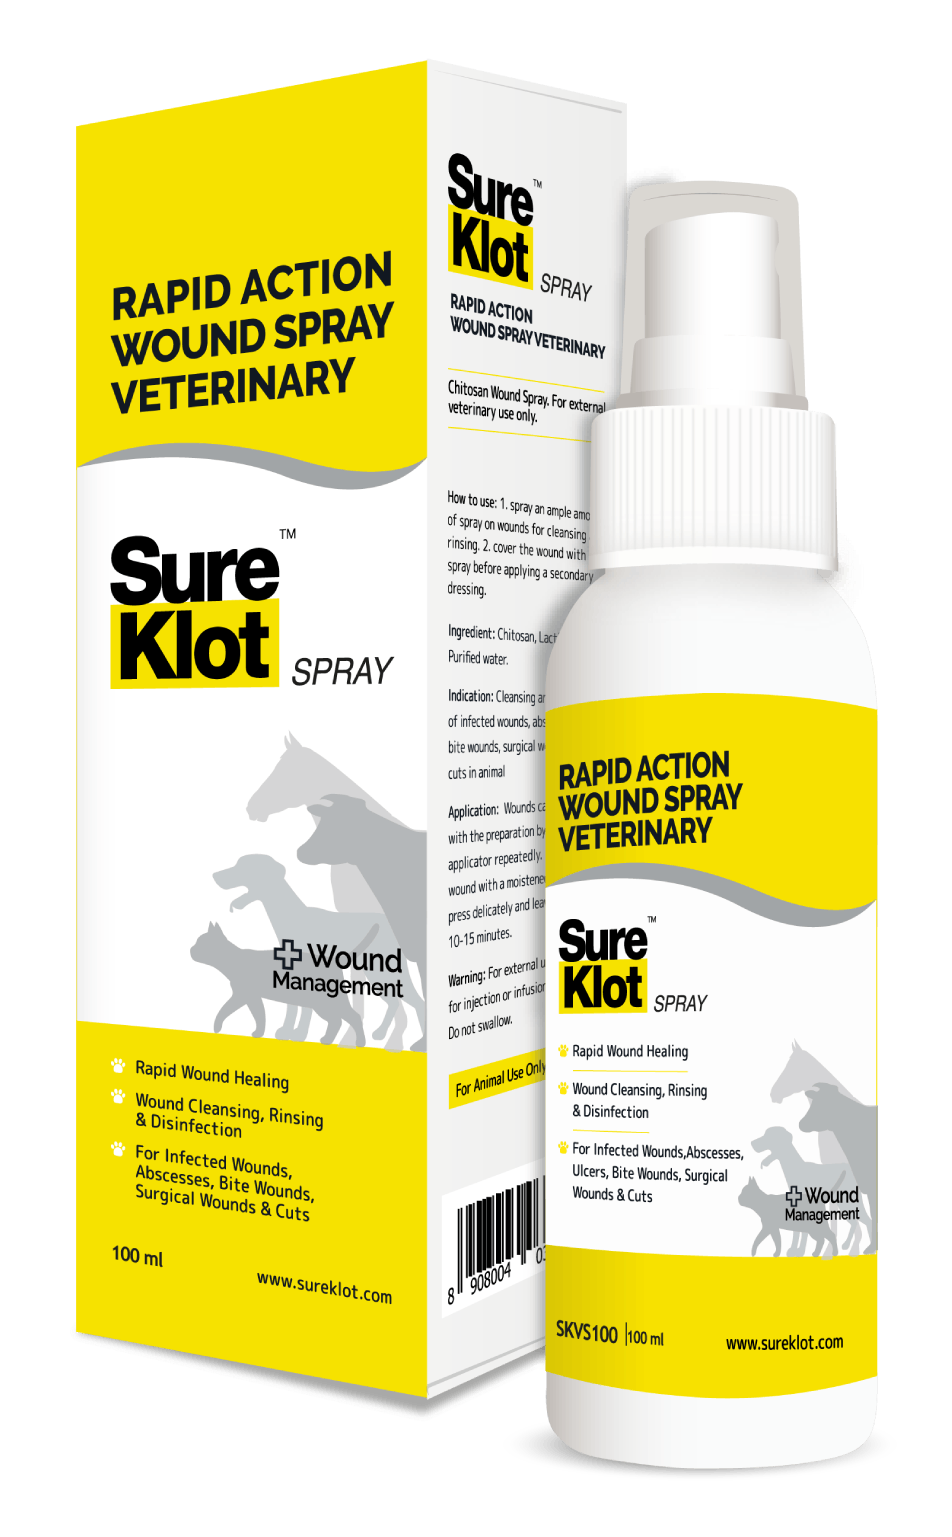 veterinary wound spray for pets dogs cats